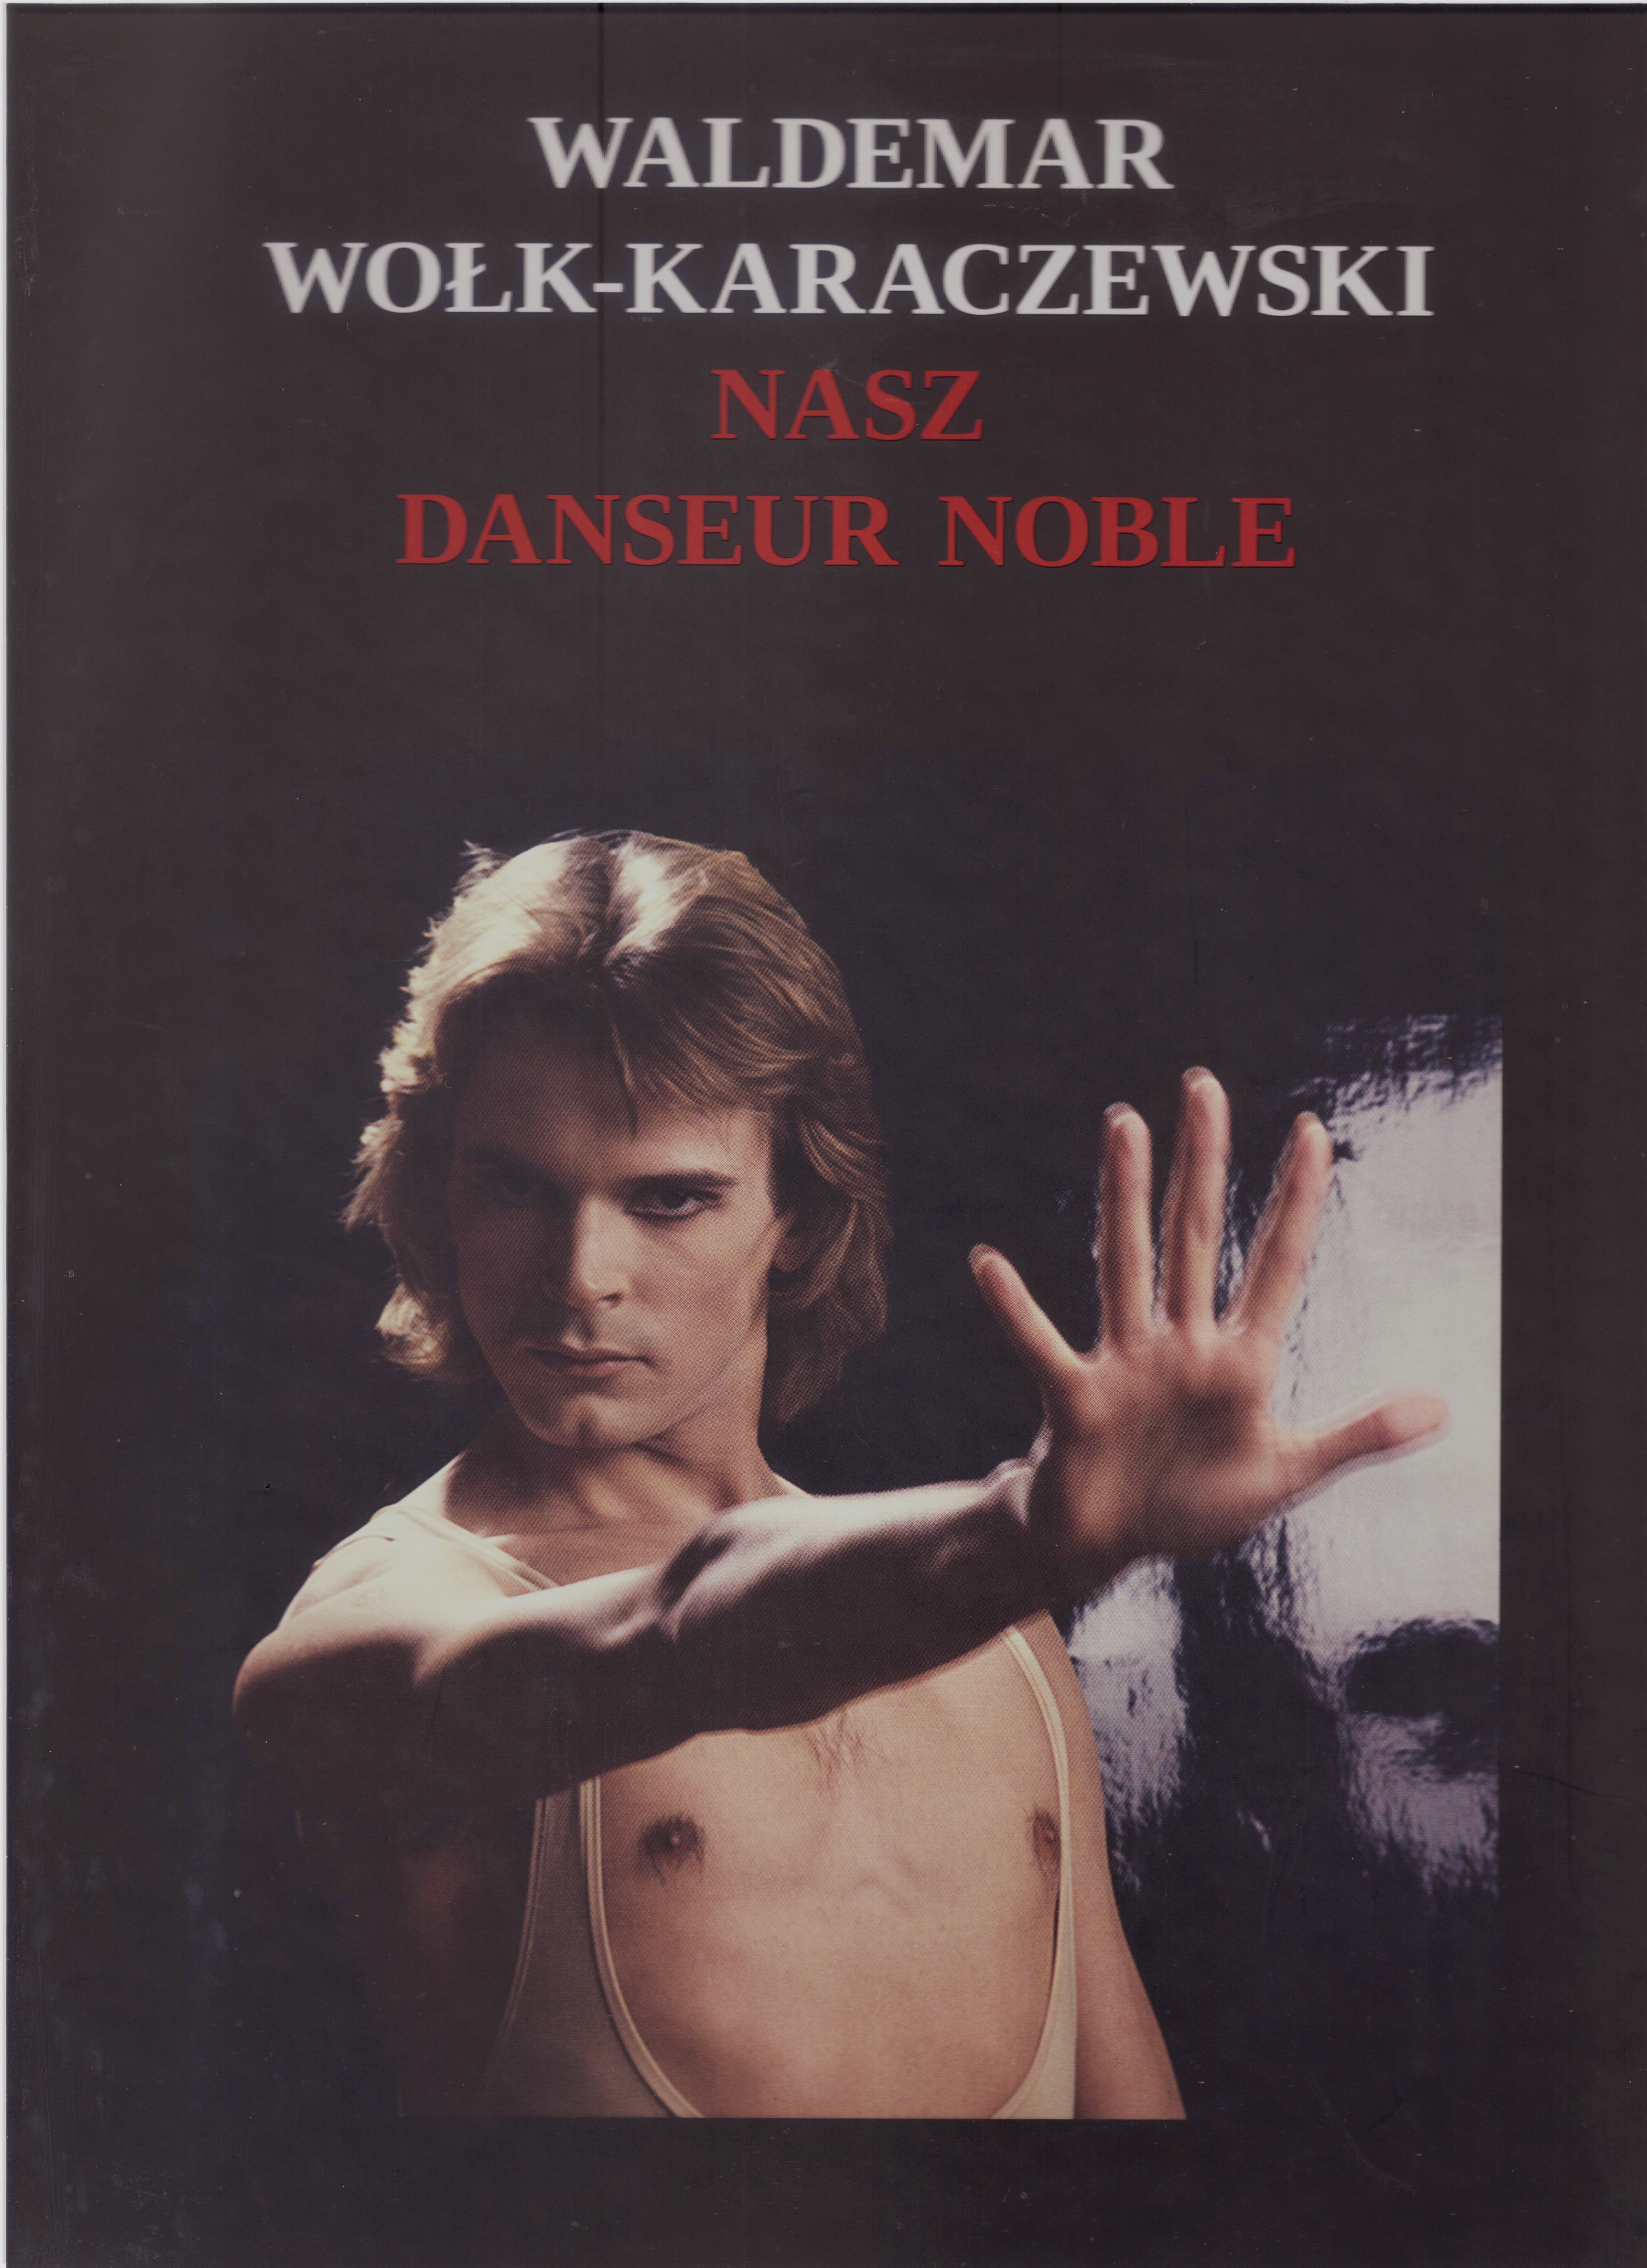 The book's cover art